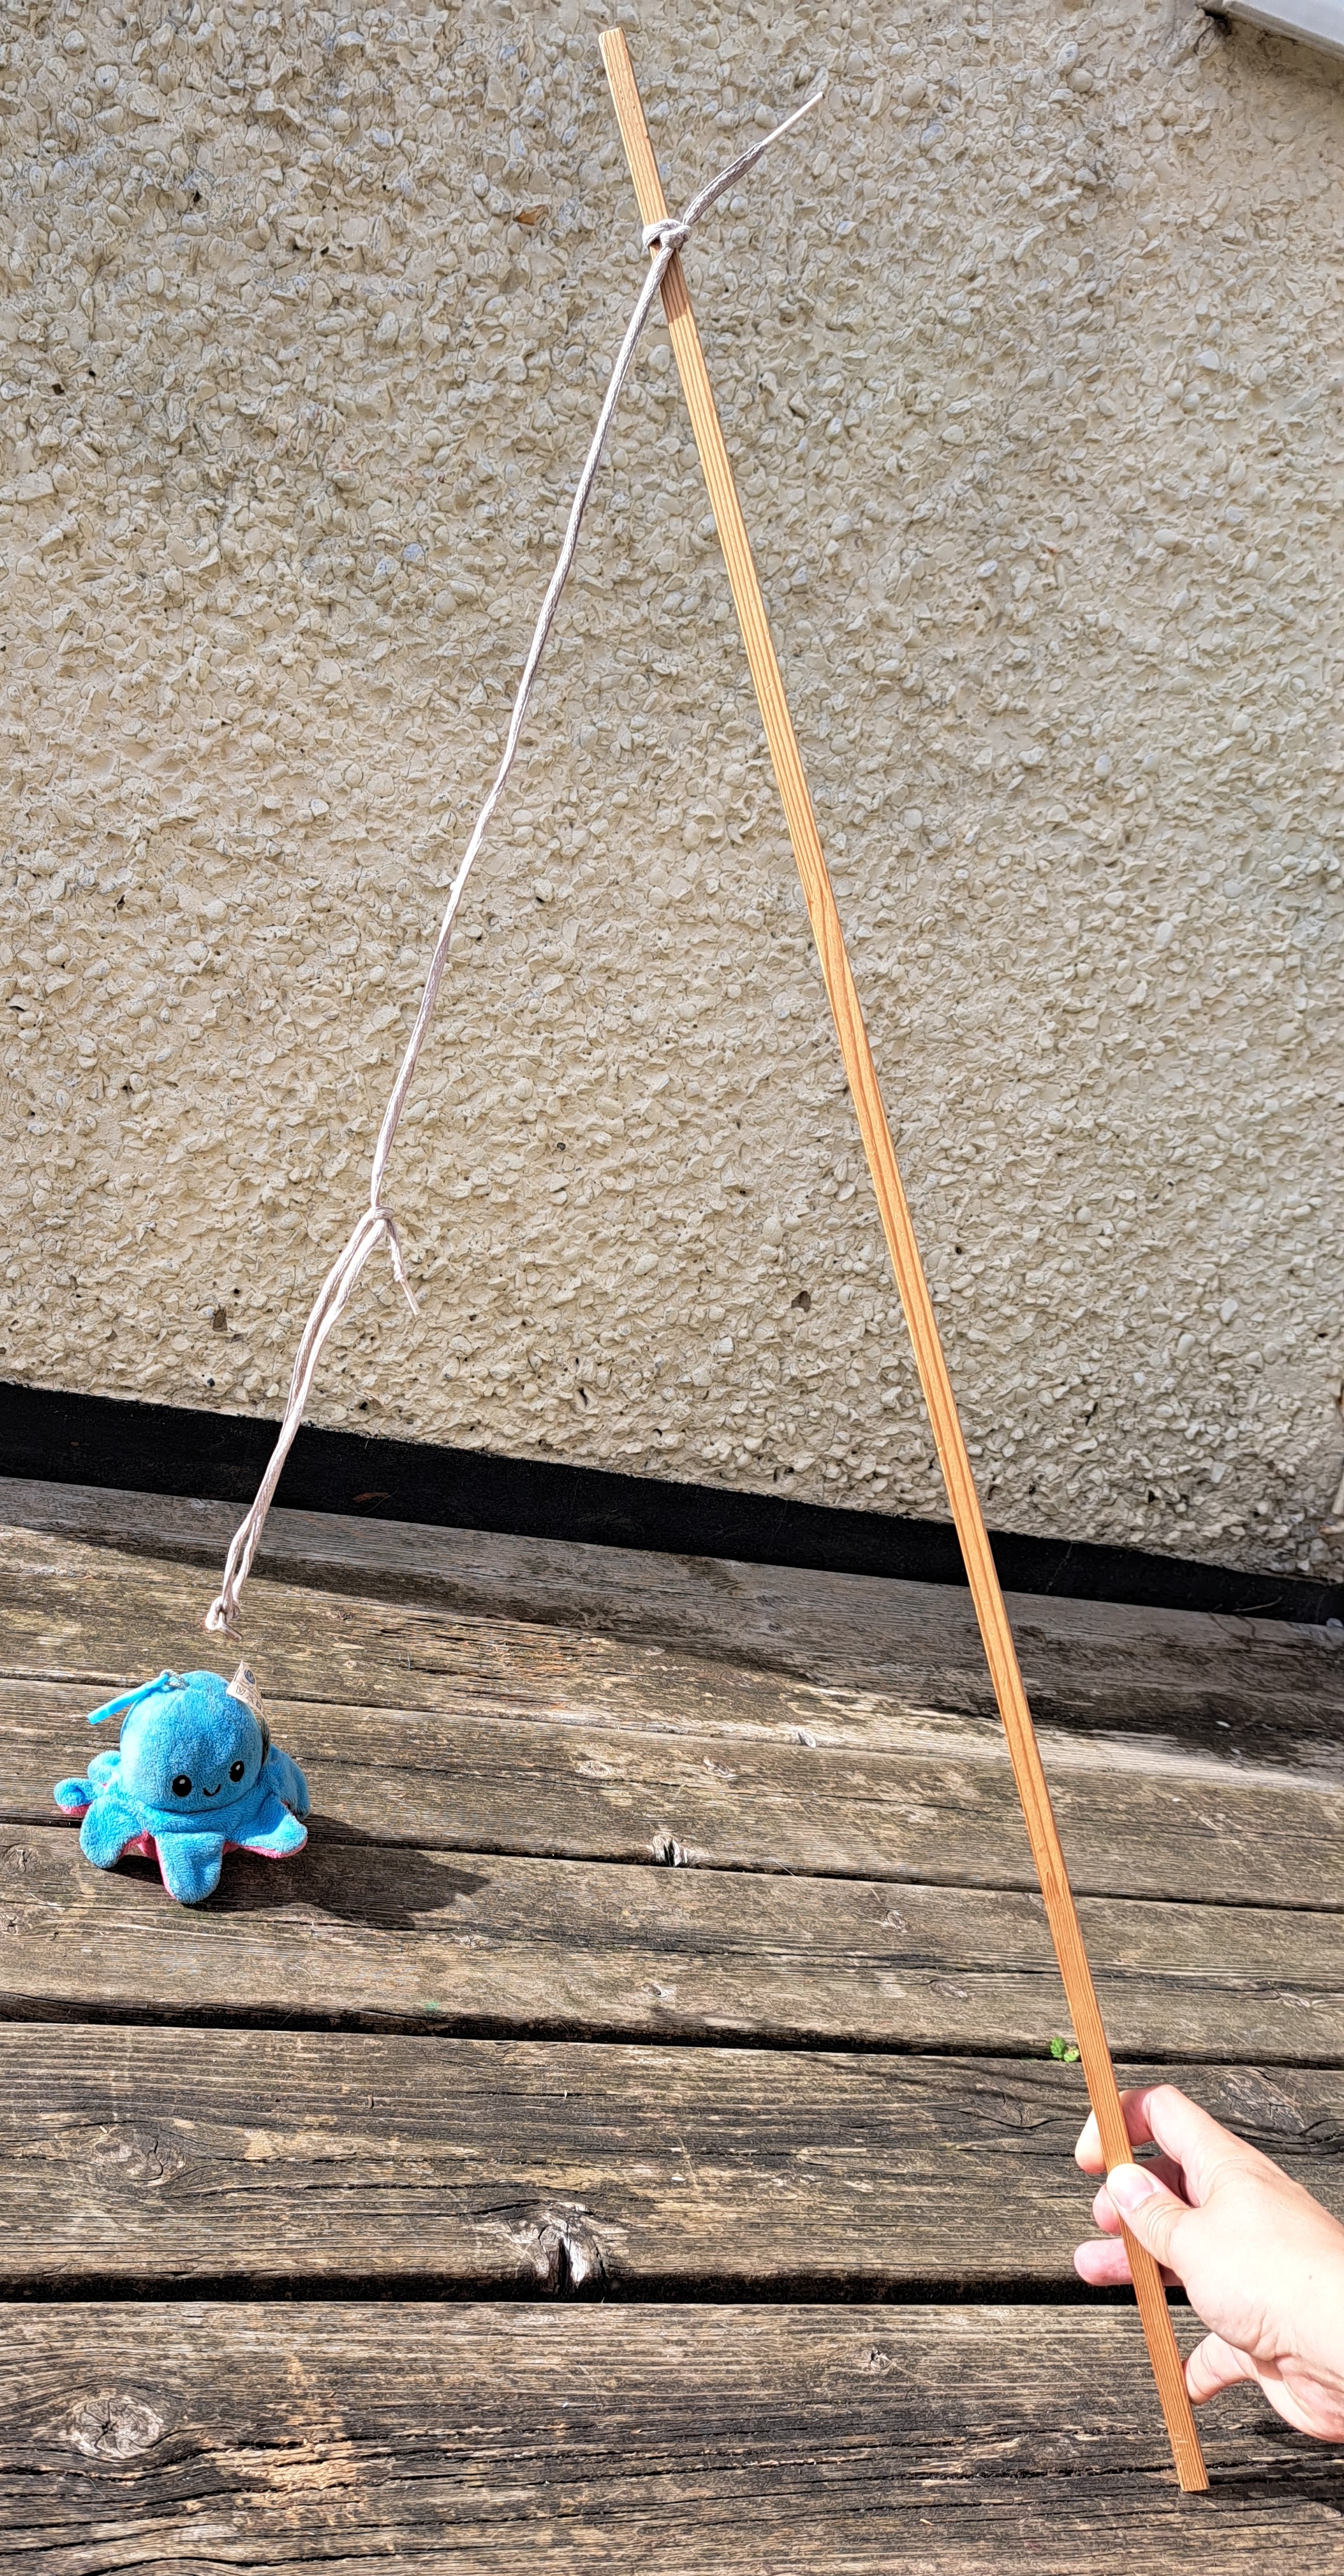 Fishing Rod made of Dowel, Shoe laces, and metal piece